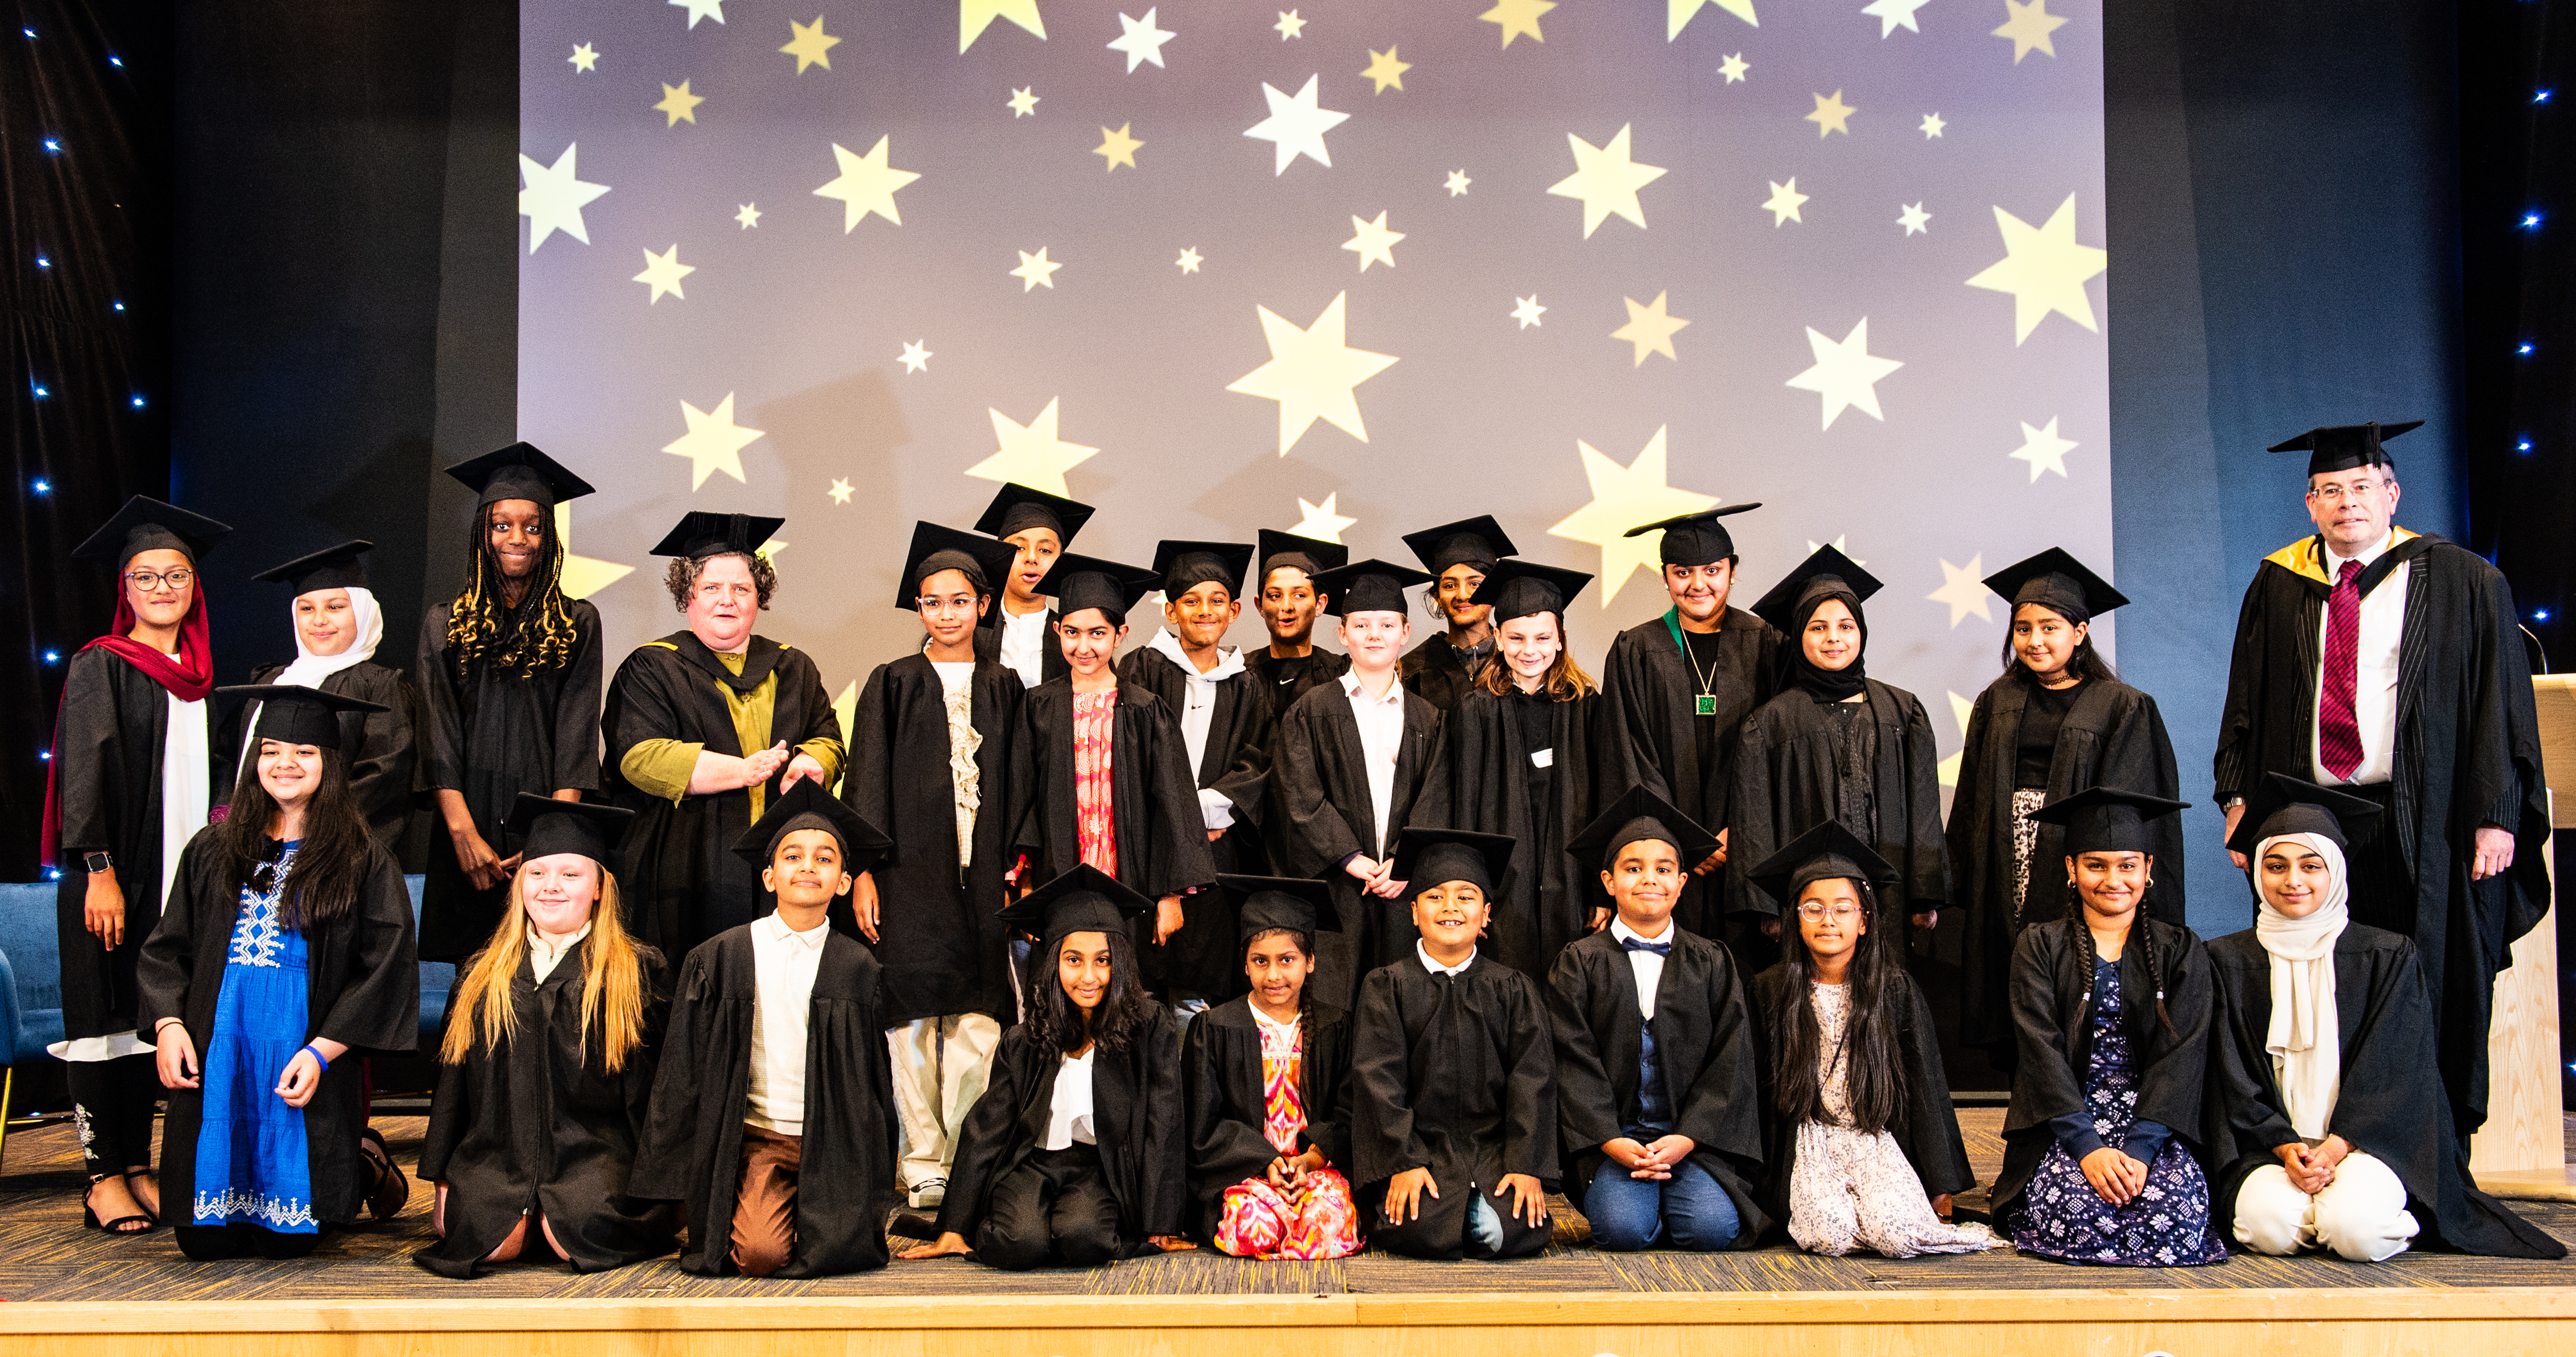 Children in graduation robes on a stage